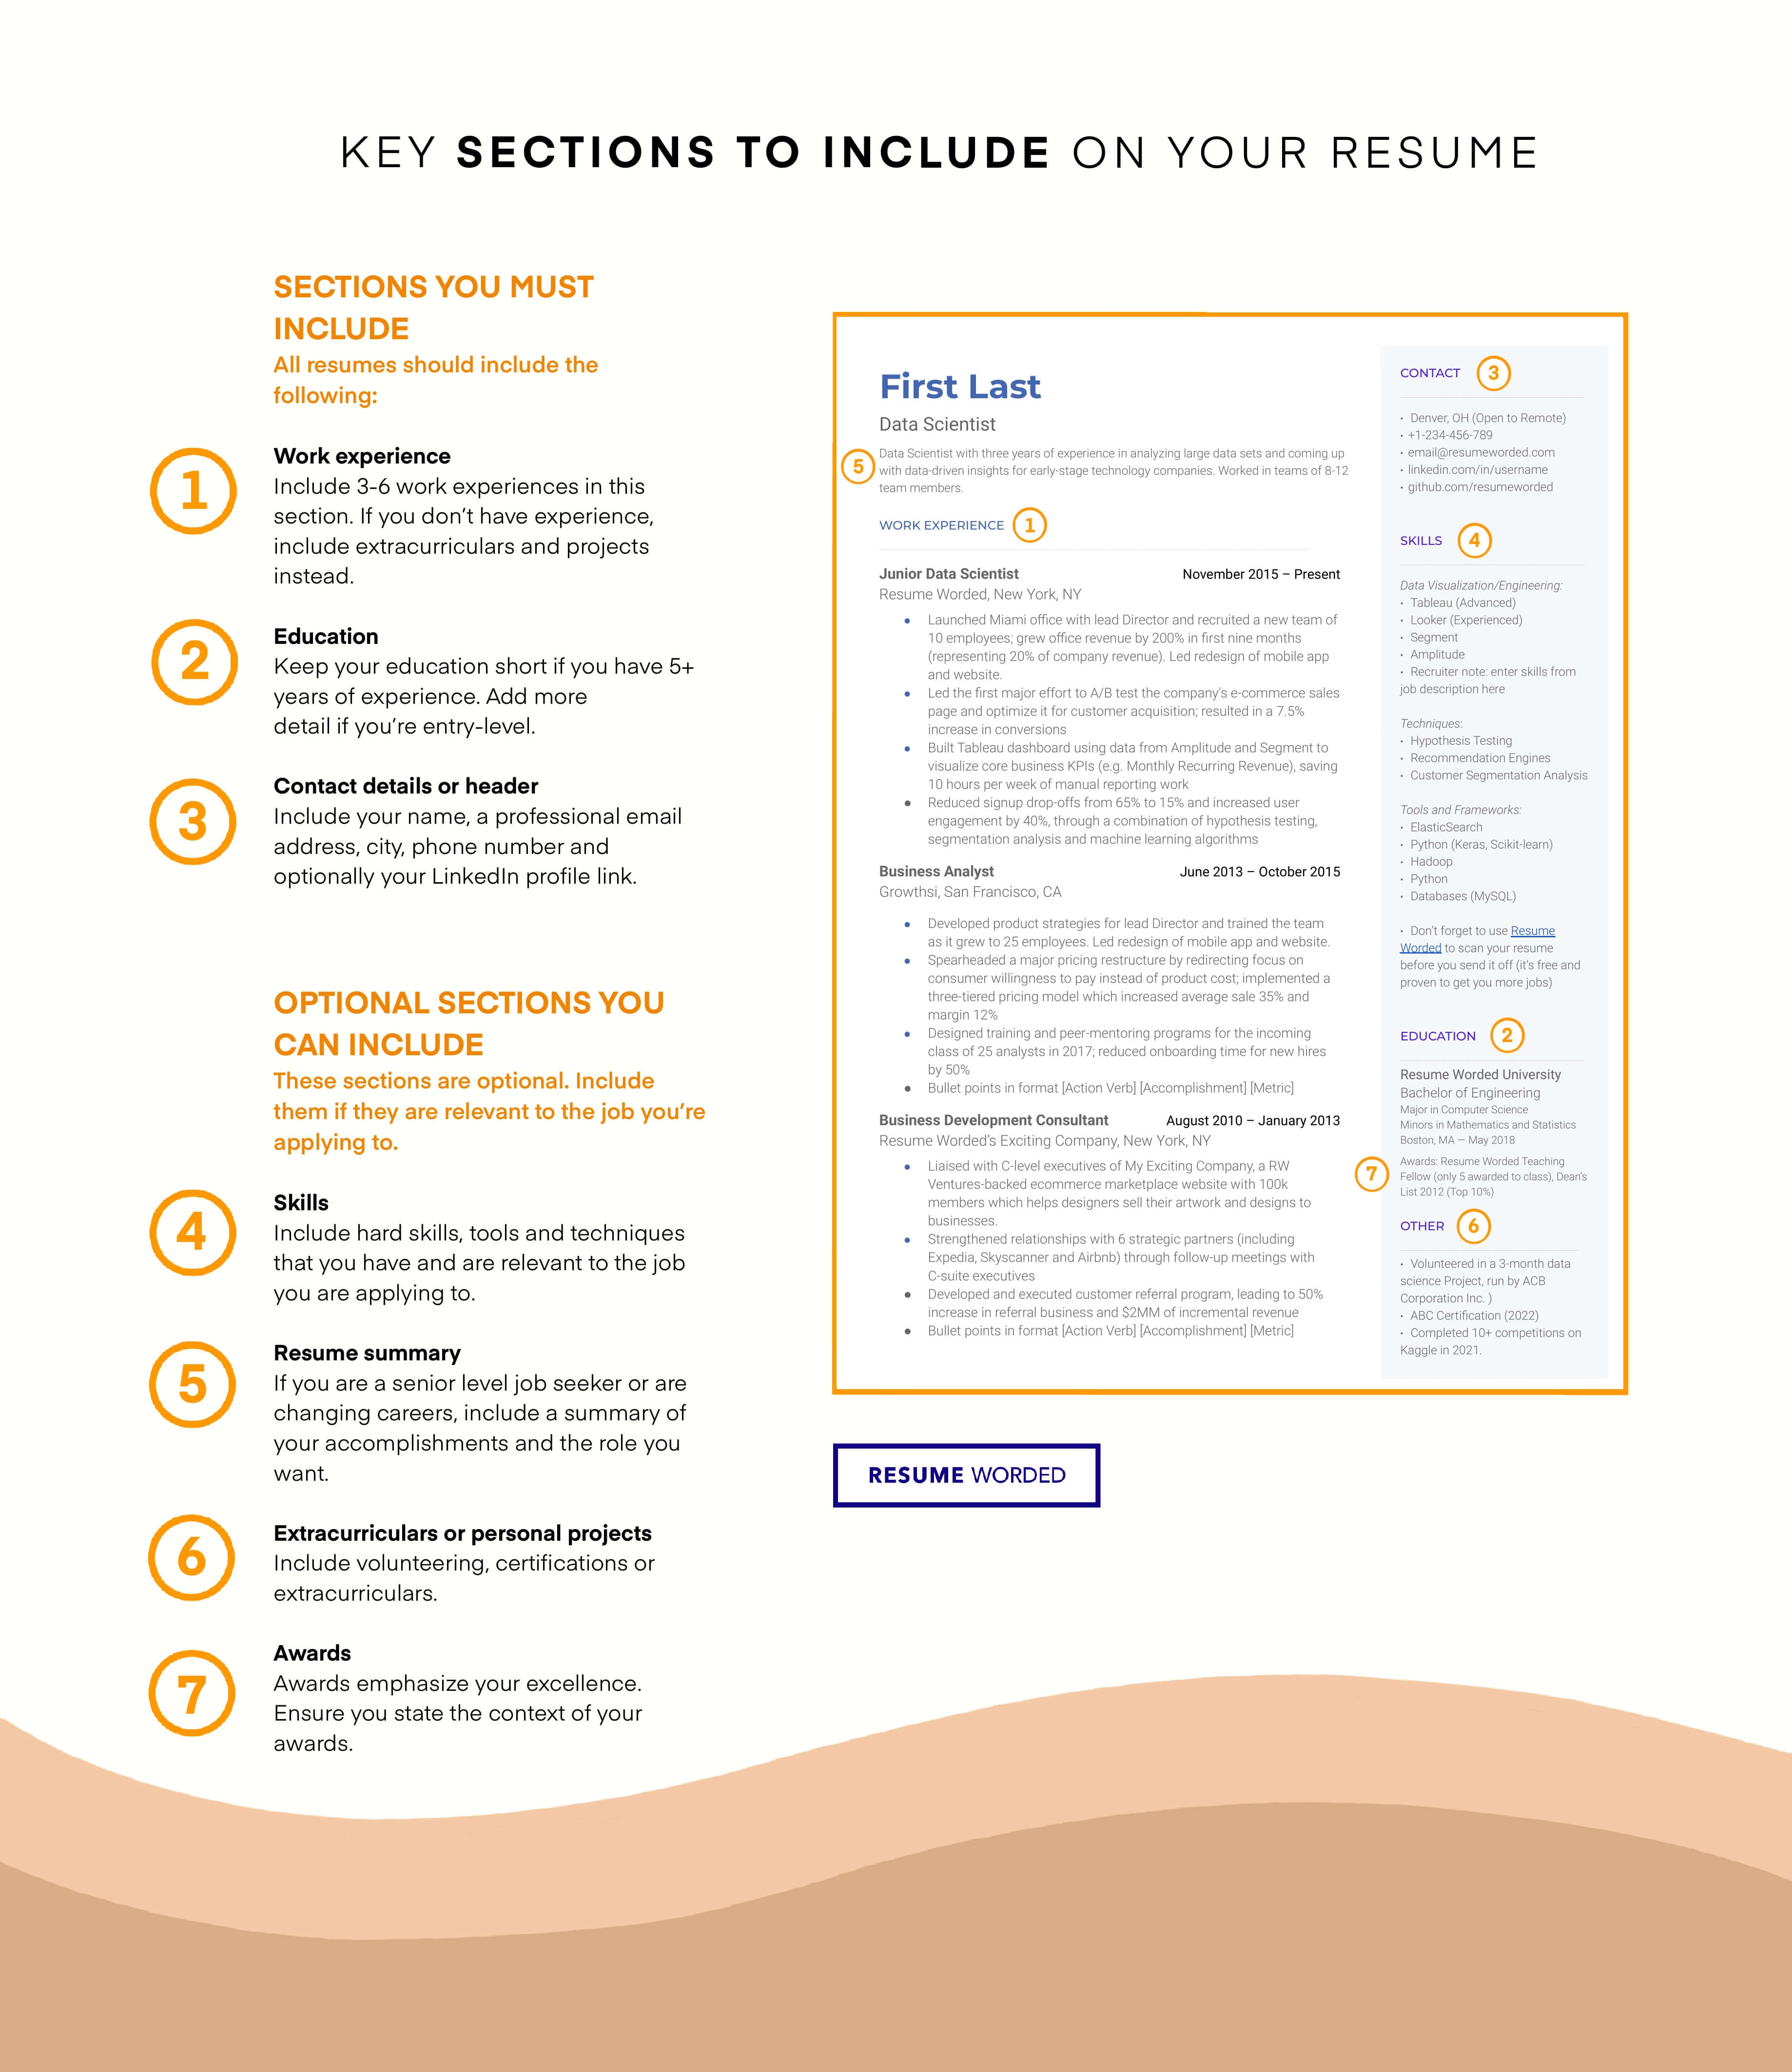 Key sections to include on your resume